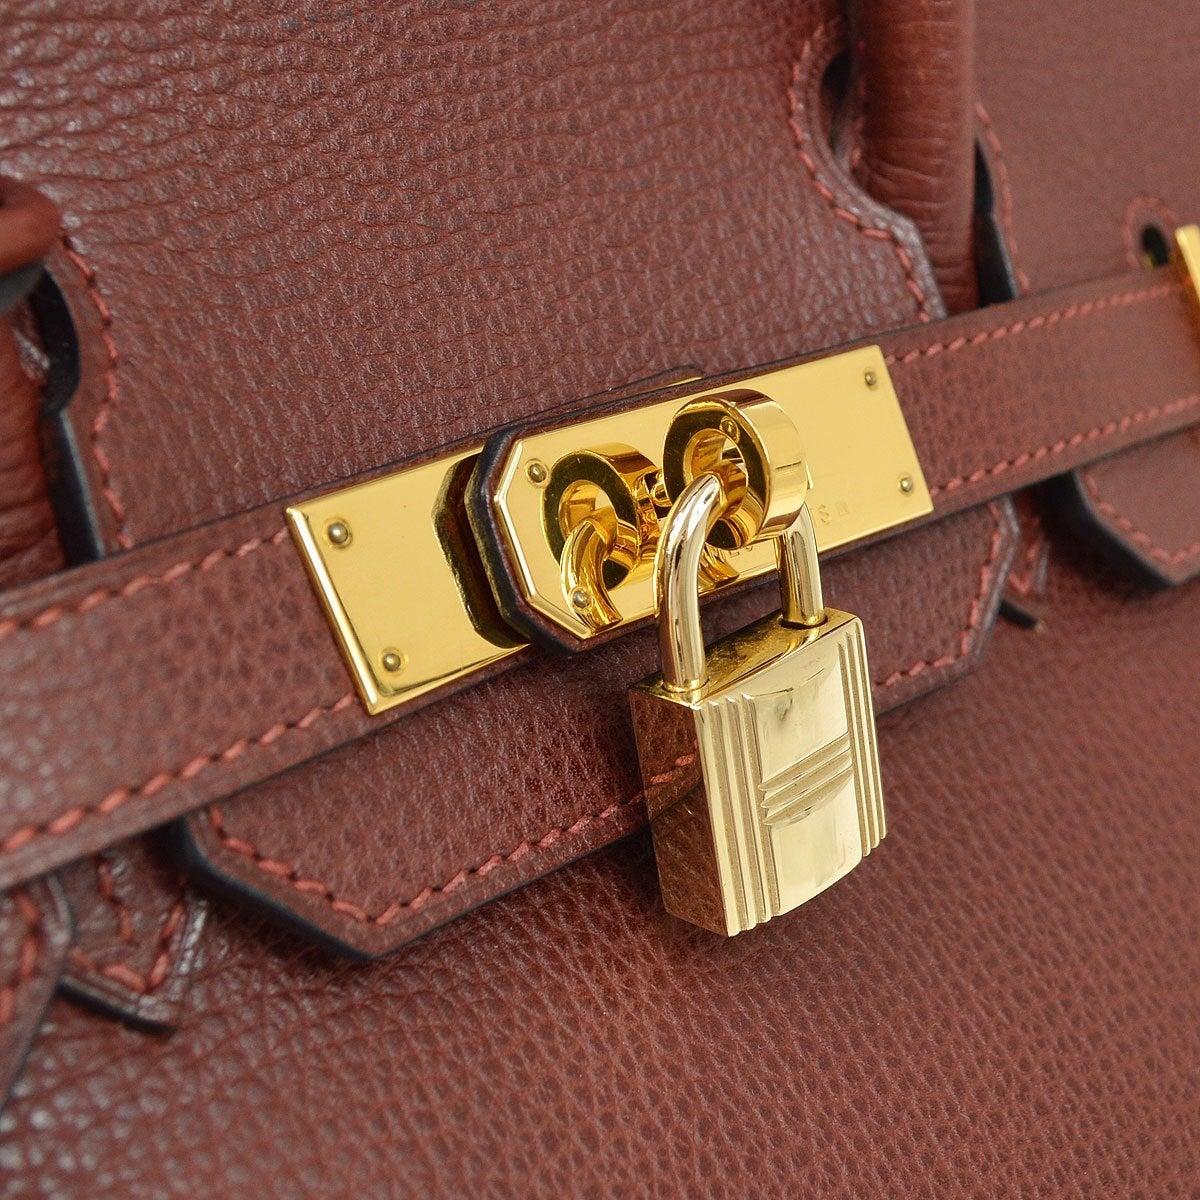 Pre-Owned Vintage Condition
From 2006 Collection
Vache Liegge Leather
Gold Tone Hardware
Leather Lining
Measures 11.75